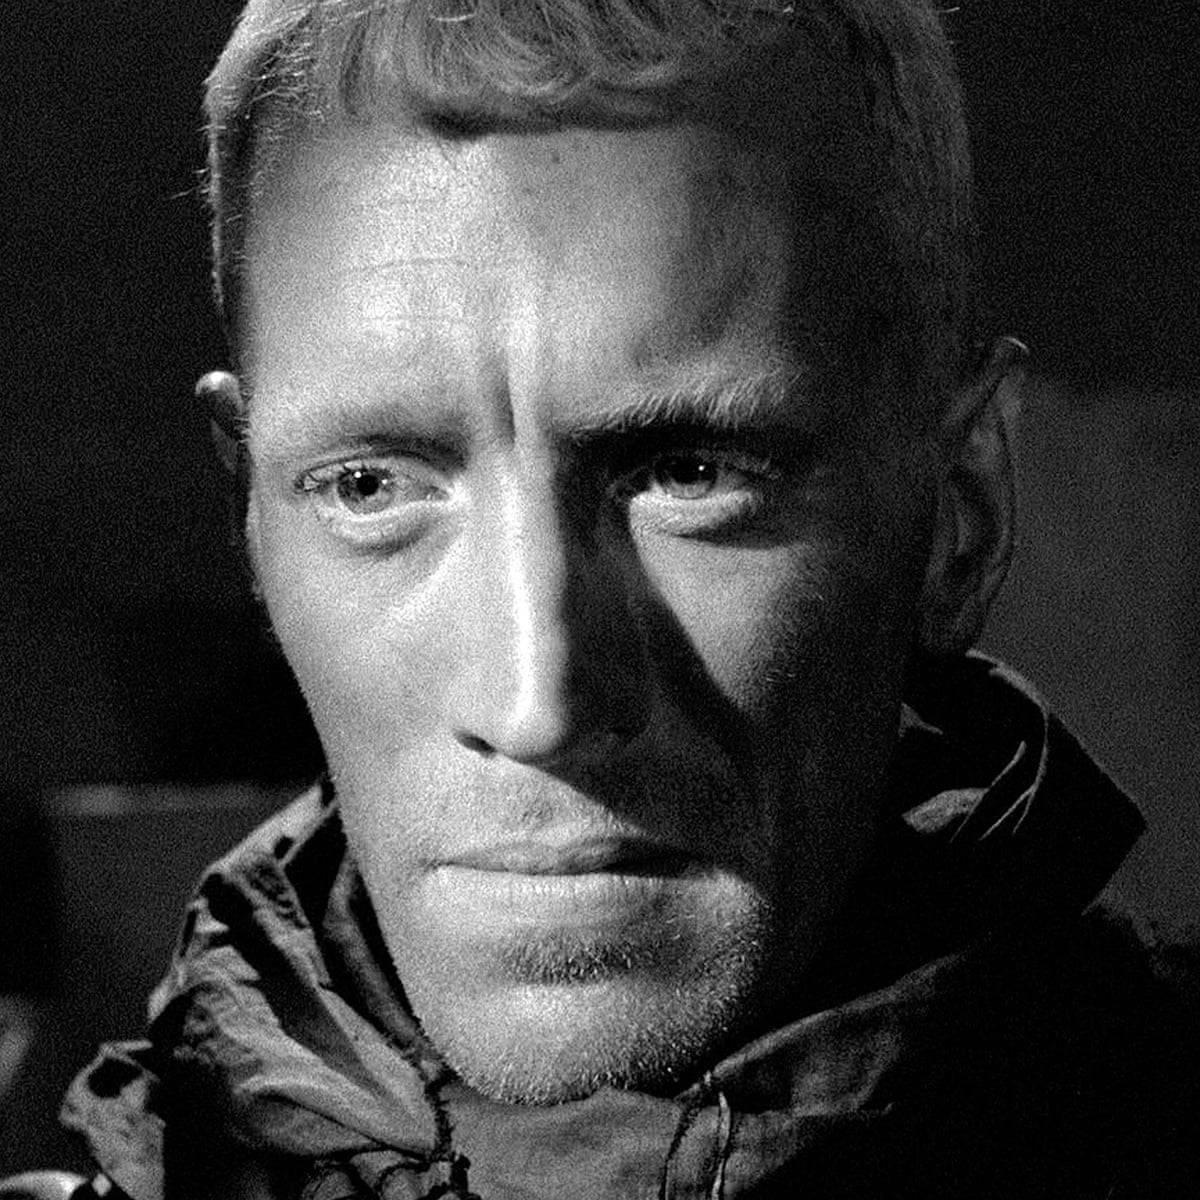 Legendary Hollywood actor Max Von Sydow in a classic scene from 'The Seventh Seal' Wallpaper